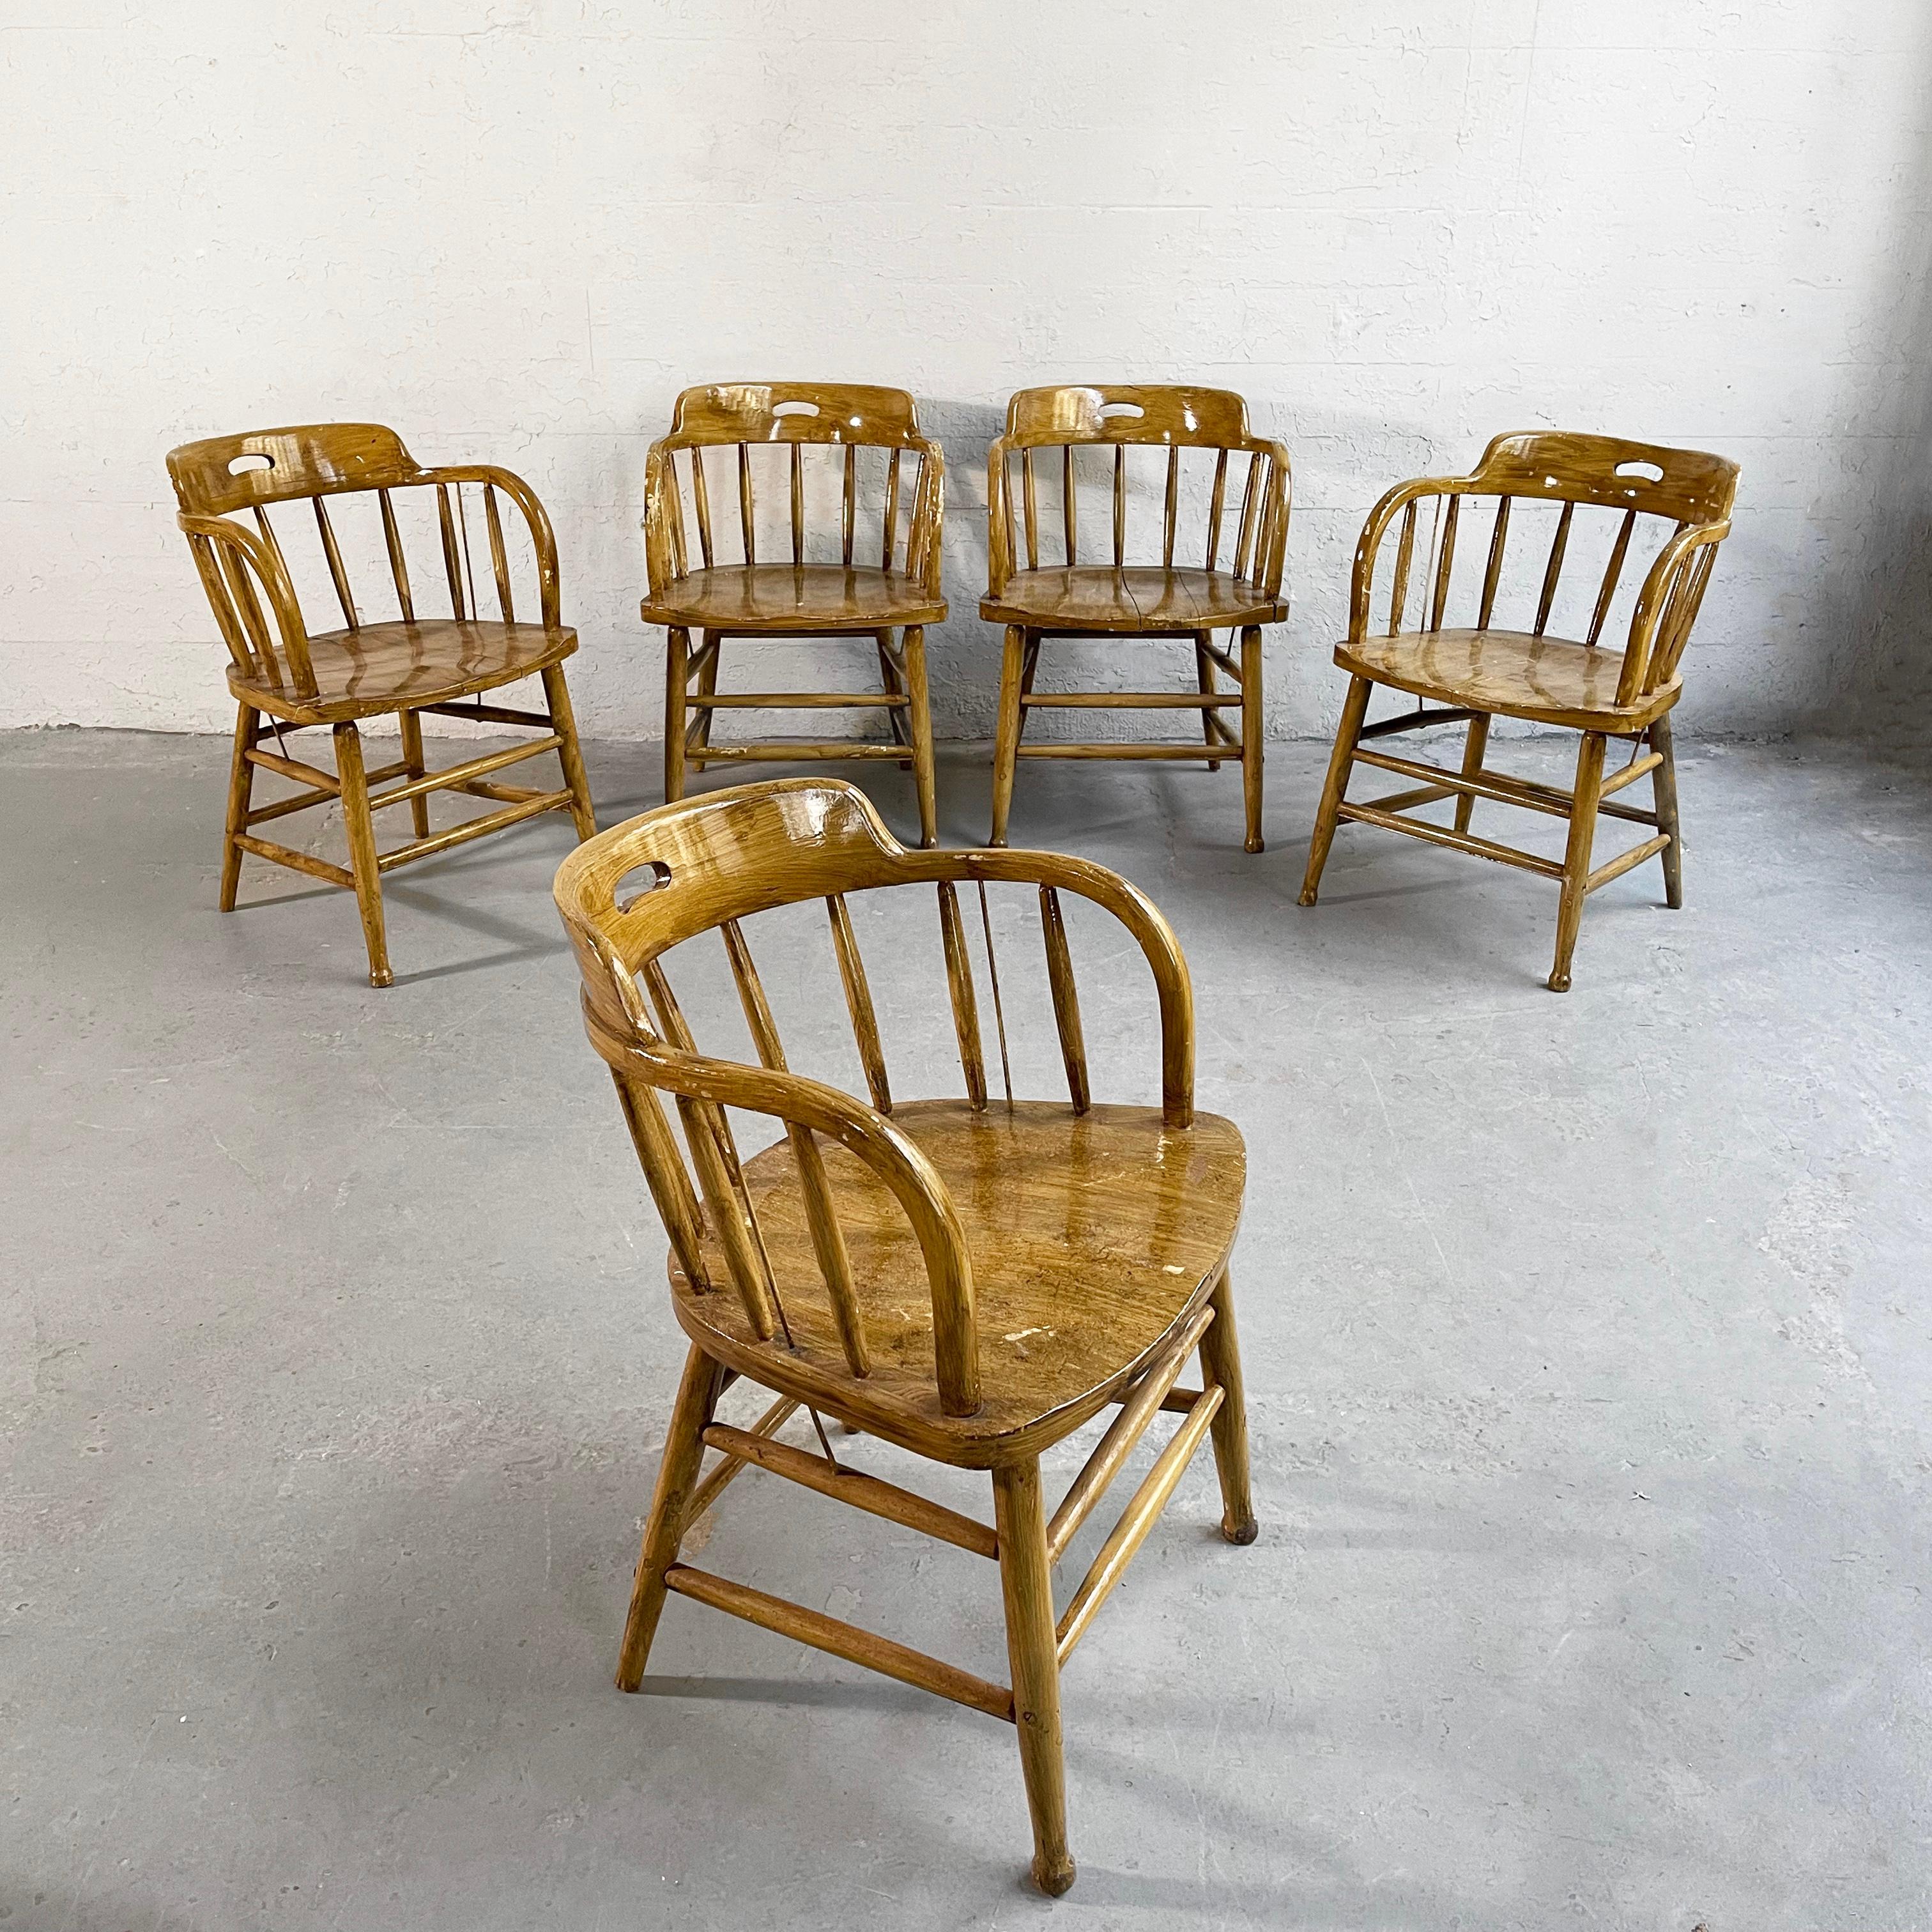 Set of five, classic, early 20th century, craftsman, lacquered oak, firehouse dining armchairs feature spindle backs and sides with metal reinforcement rods. The chairs retain their wonderful, original patina. A contrasting captain's chair can be